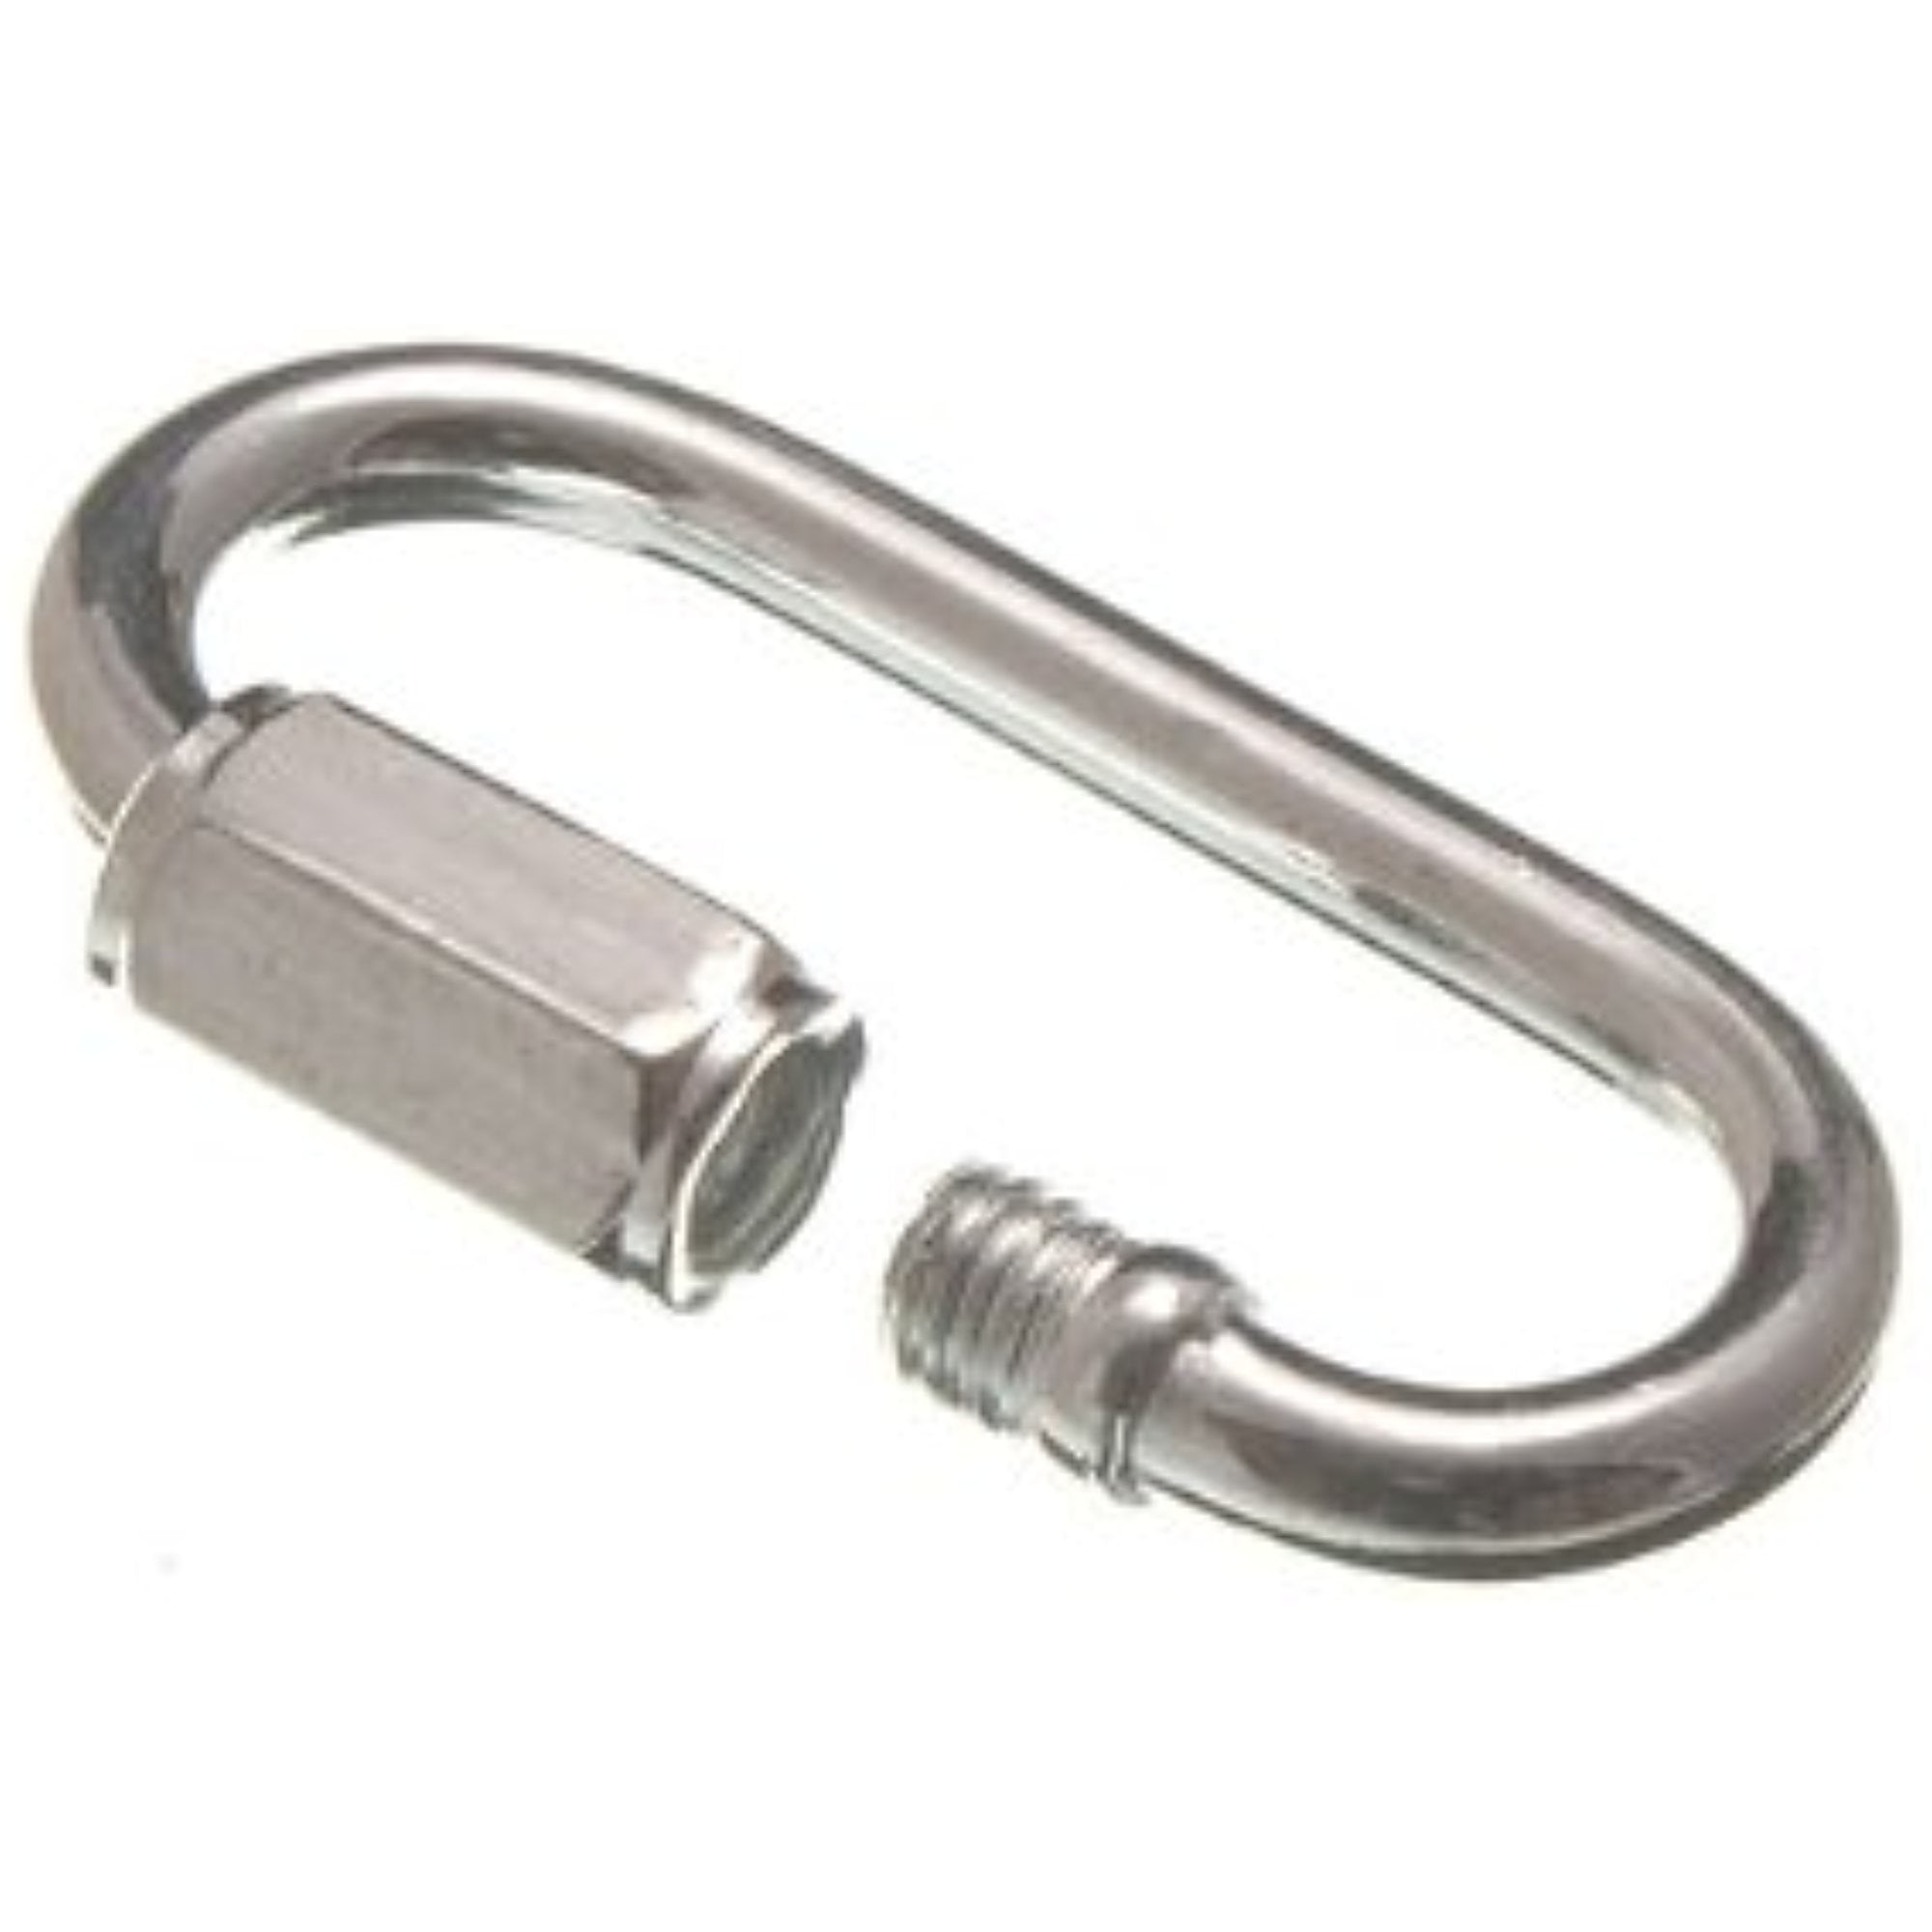 Quick Link with ENLARGED OPENING Galvanised Chain Repair Extender Gym Screw Lock 